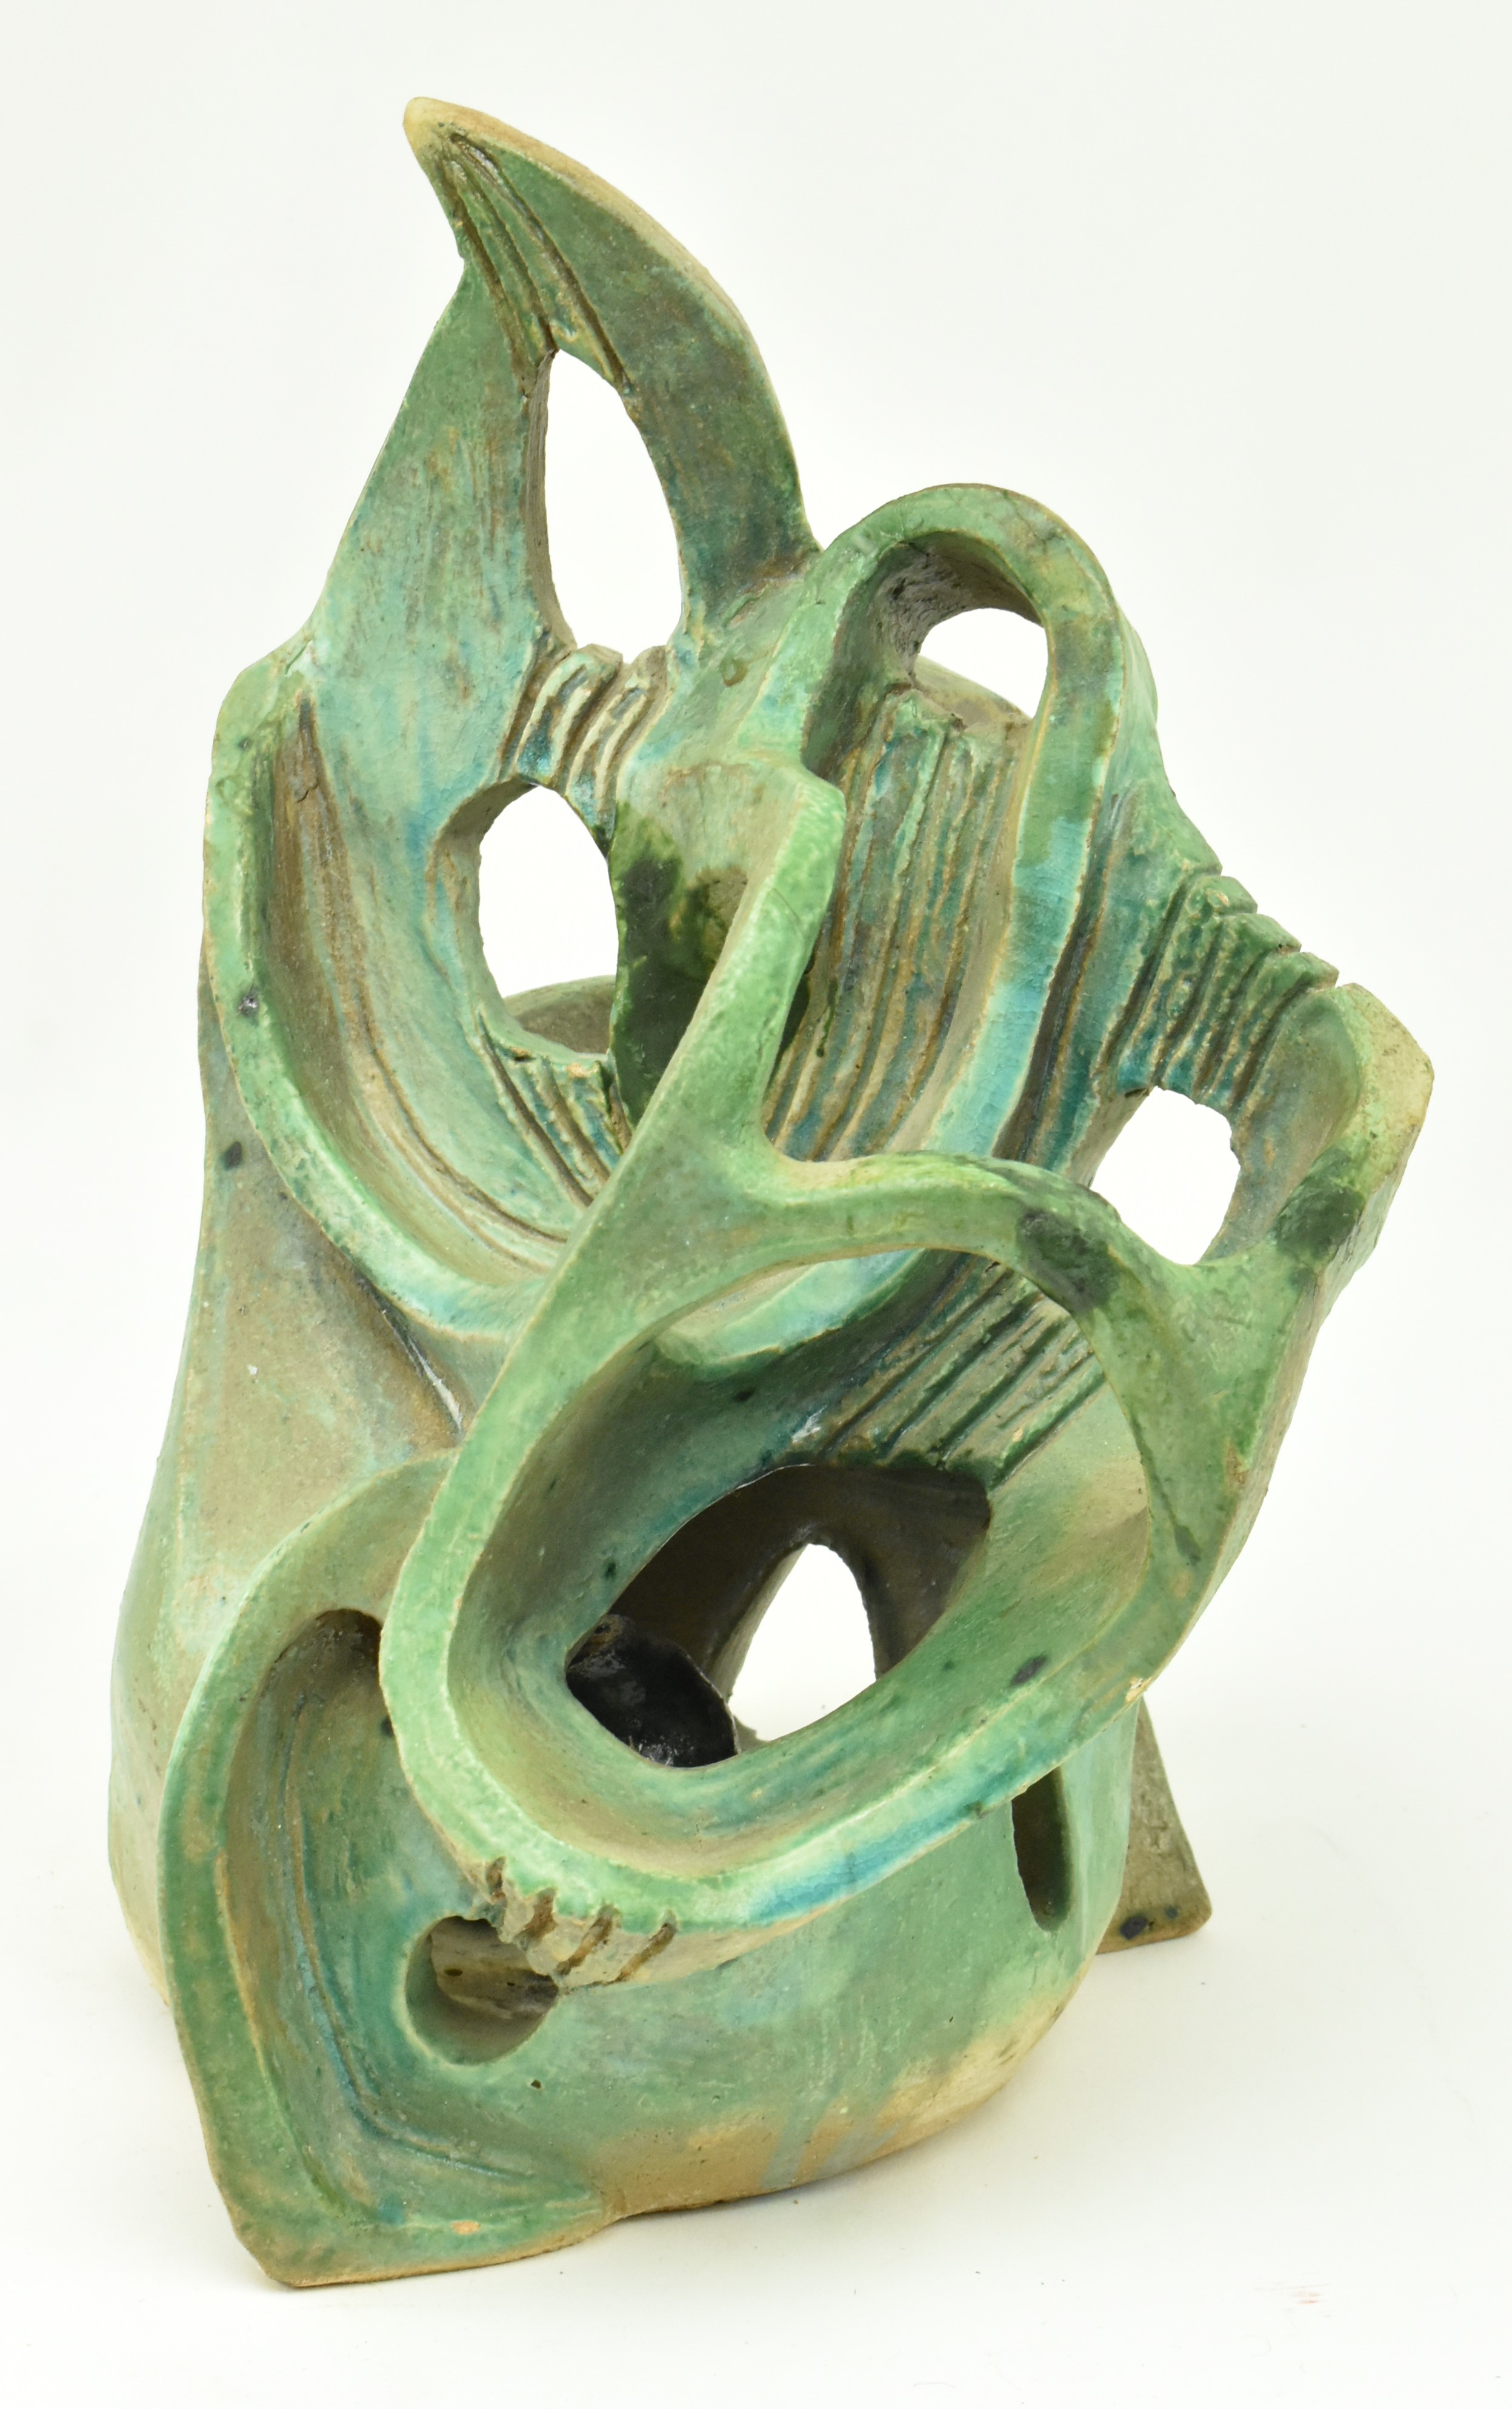 VINTAGE 20TH CENTURY STUDIO ART POTTERY ABSTRACT SCULPTURE - Image 2 of 7